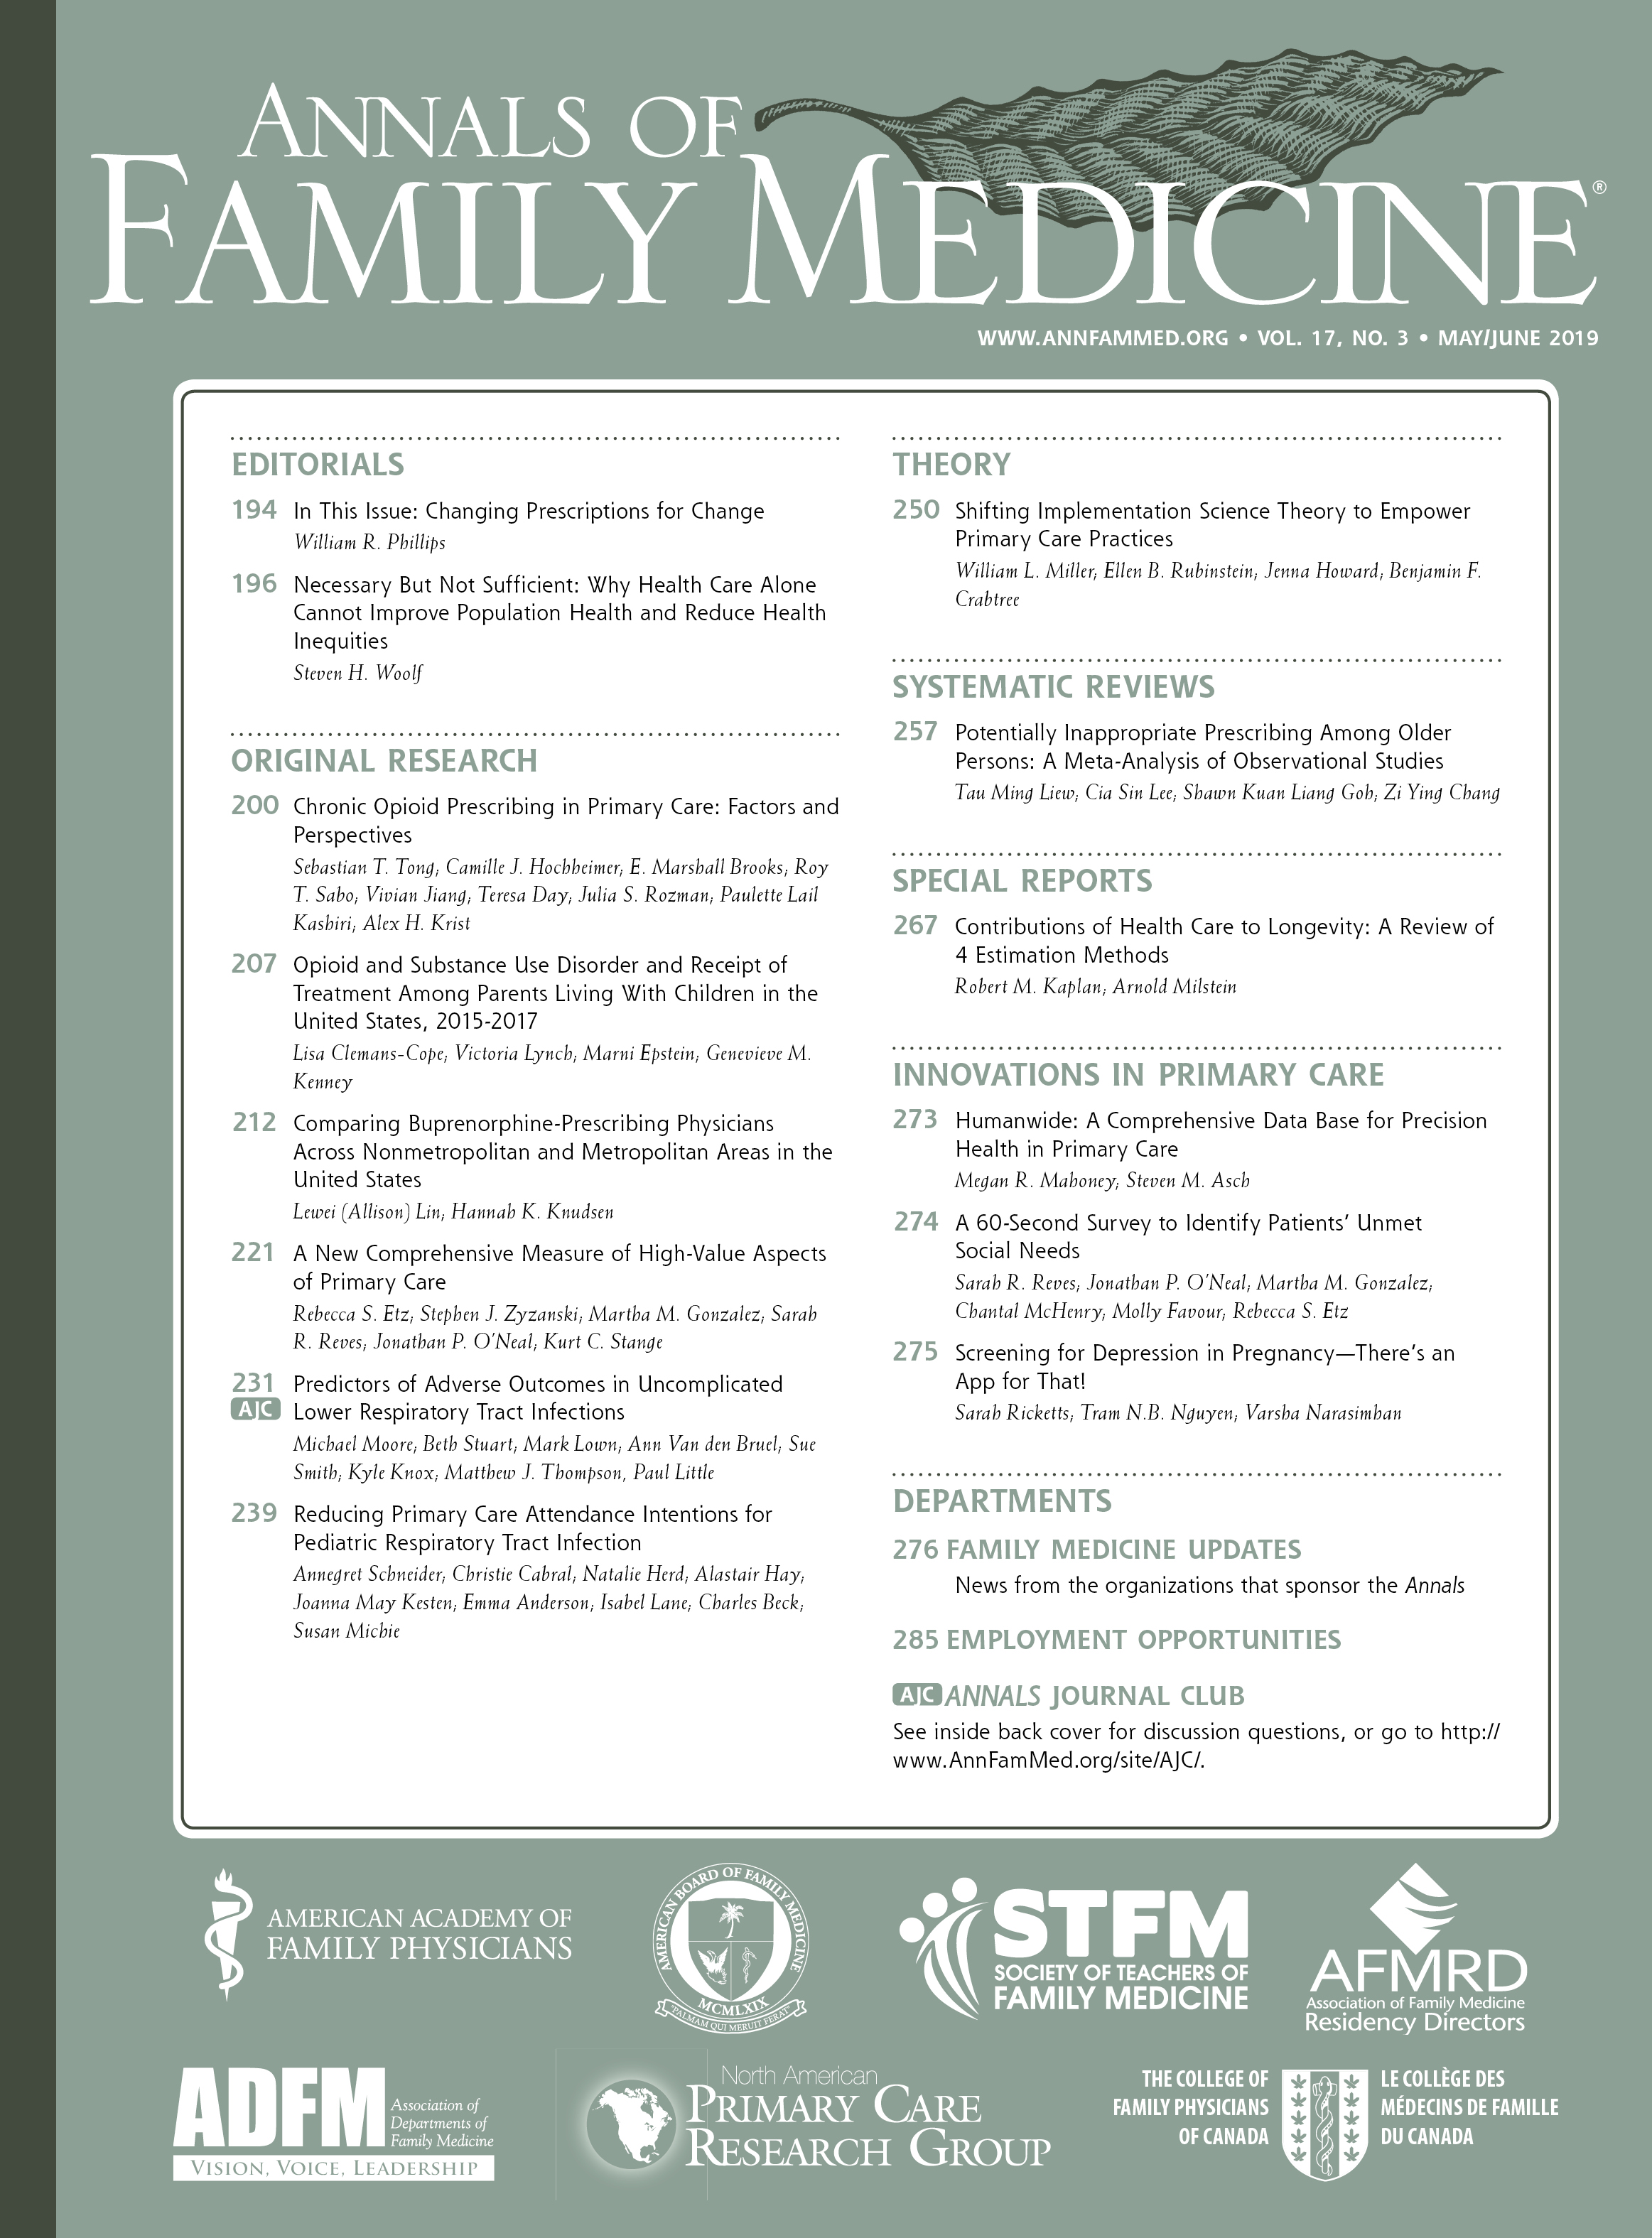 Optimization of Electronic Health Record Usability Through a Department-Led Quality Improvement Process [Original Research]